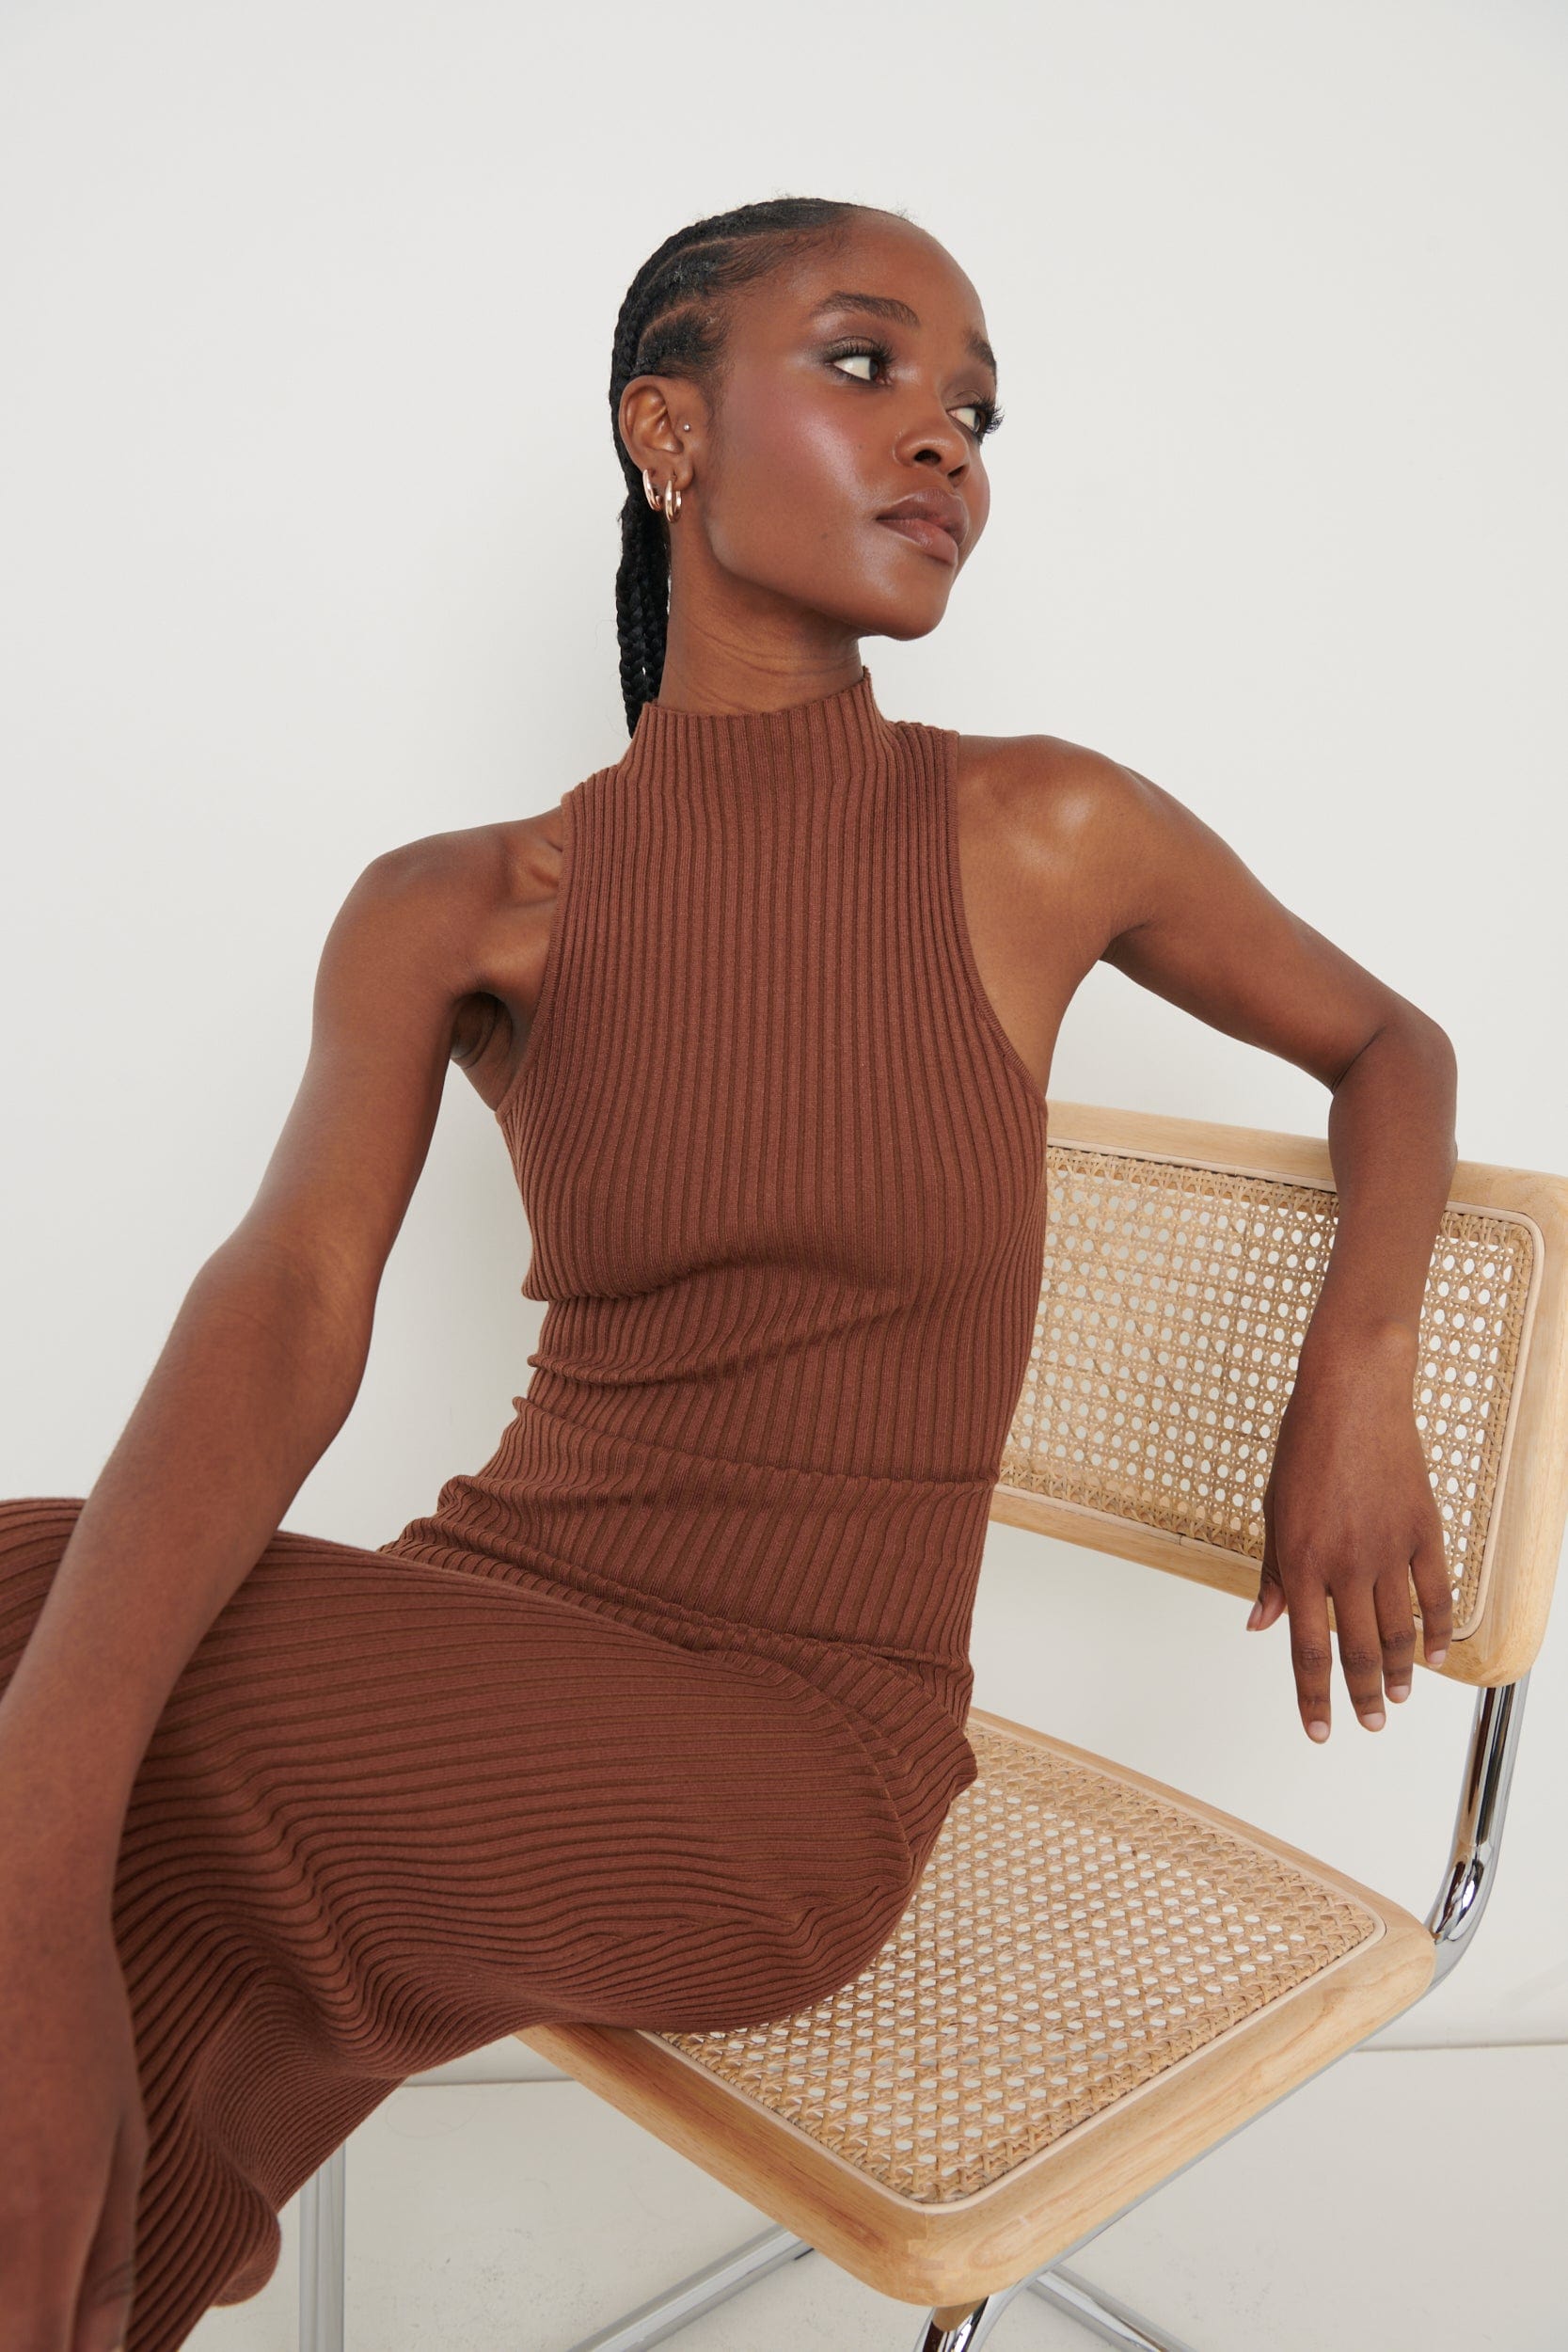 Sun-imperial - brown rib knitted deep v neck bodycon slim midi dress with a  matching ribbed bra set – Sun-Imperial